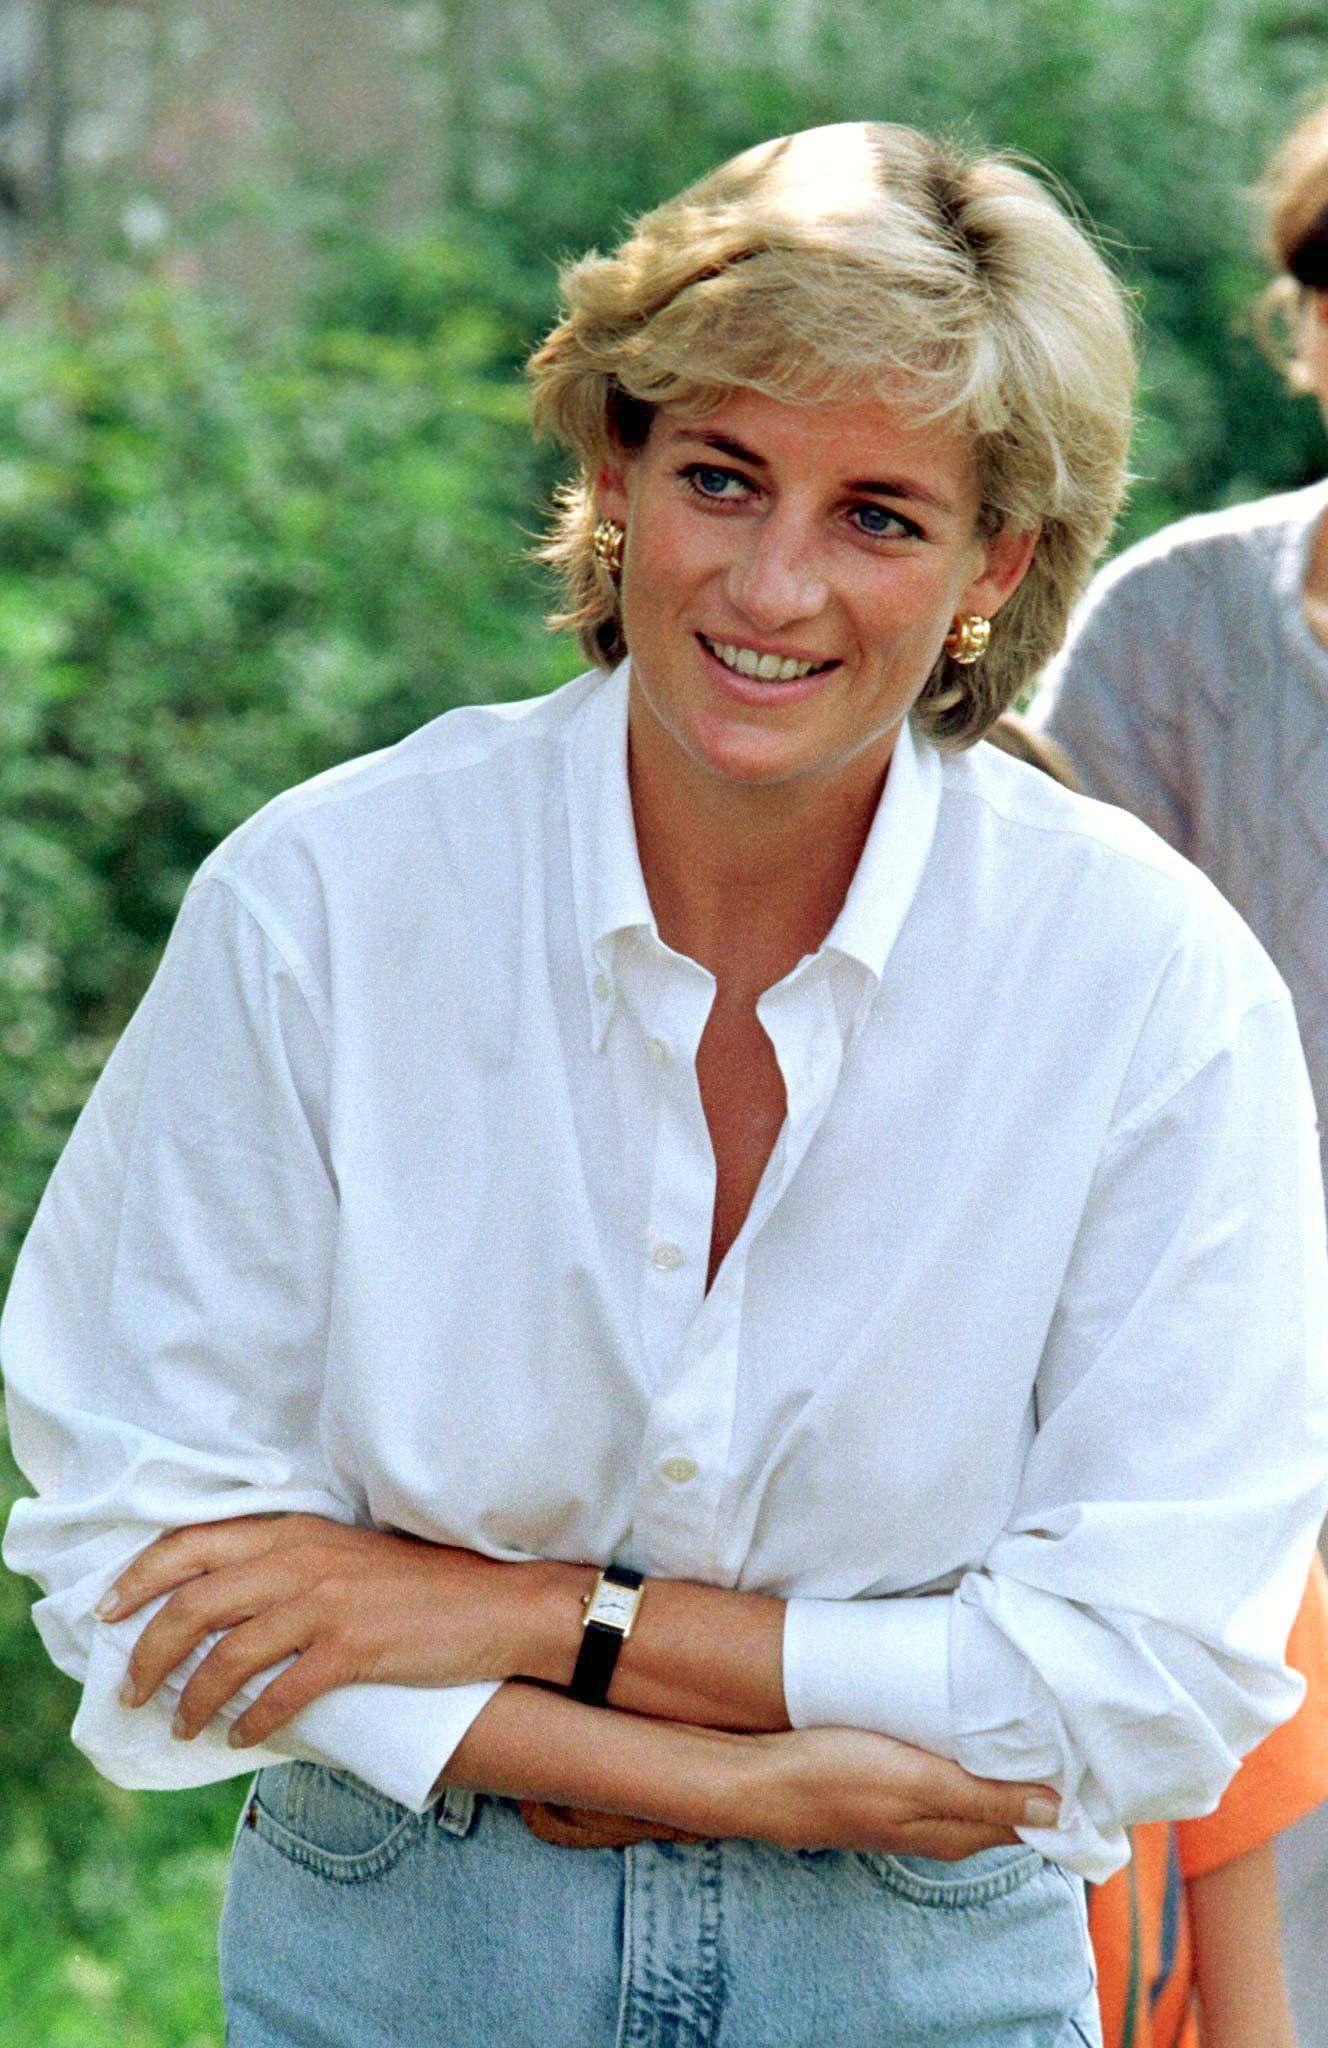 FILE PHOTO: Diana Princess of Wales smiles at an event held in support of land mine victims in Tuzla, Bosnia